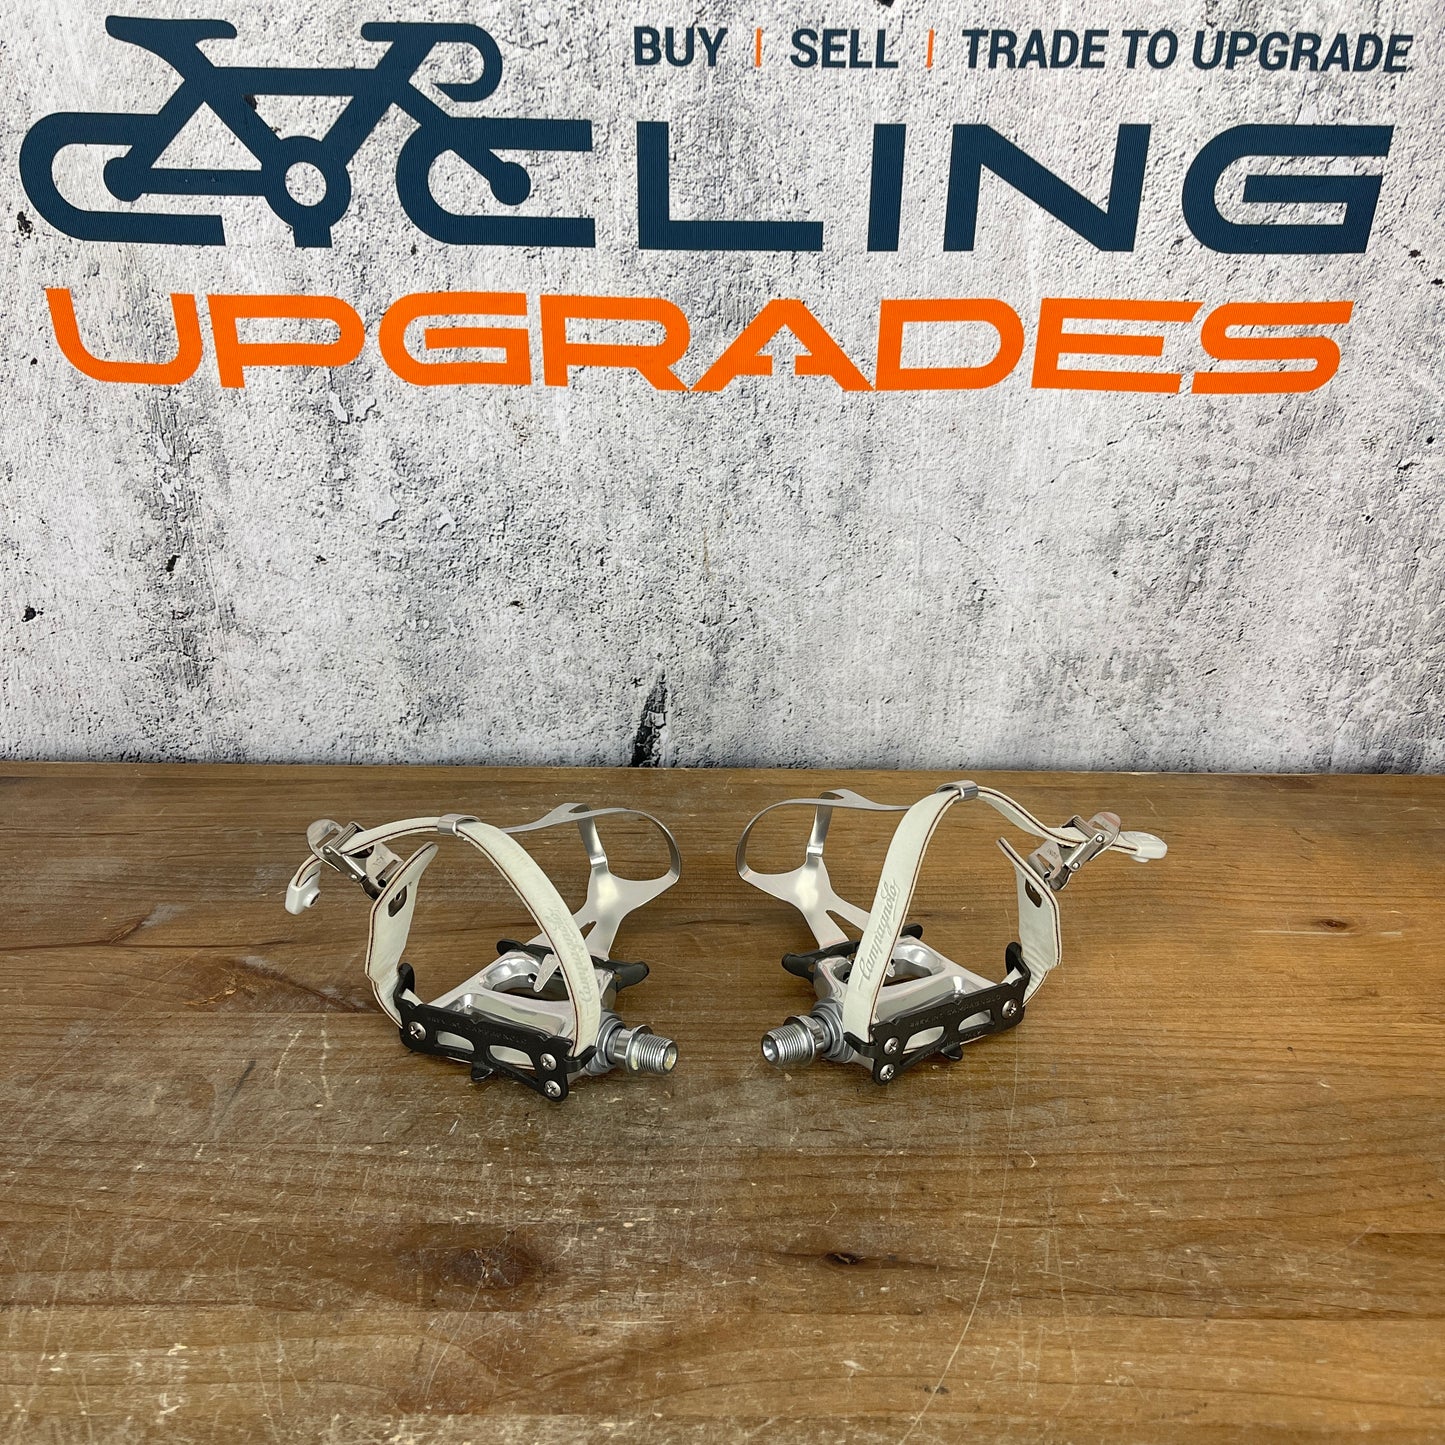 New! Vintage Campagnolo C-Record Pista Track Pedals w/ Toe Clips & Campy Straps